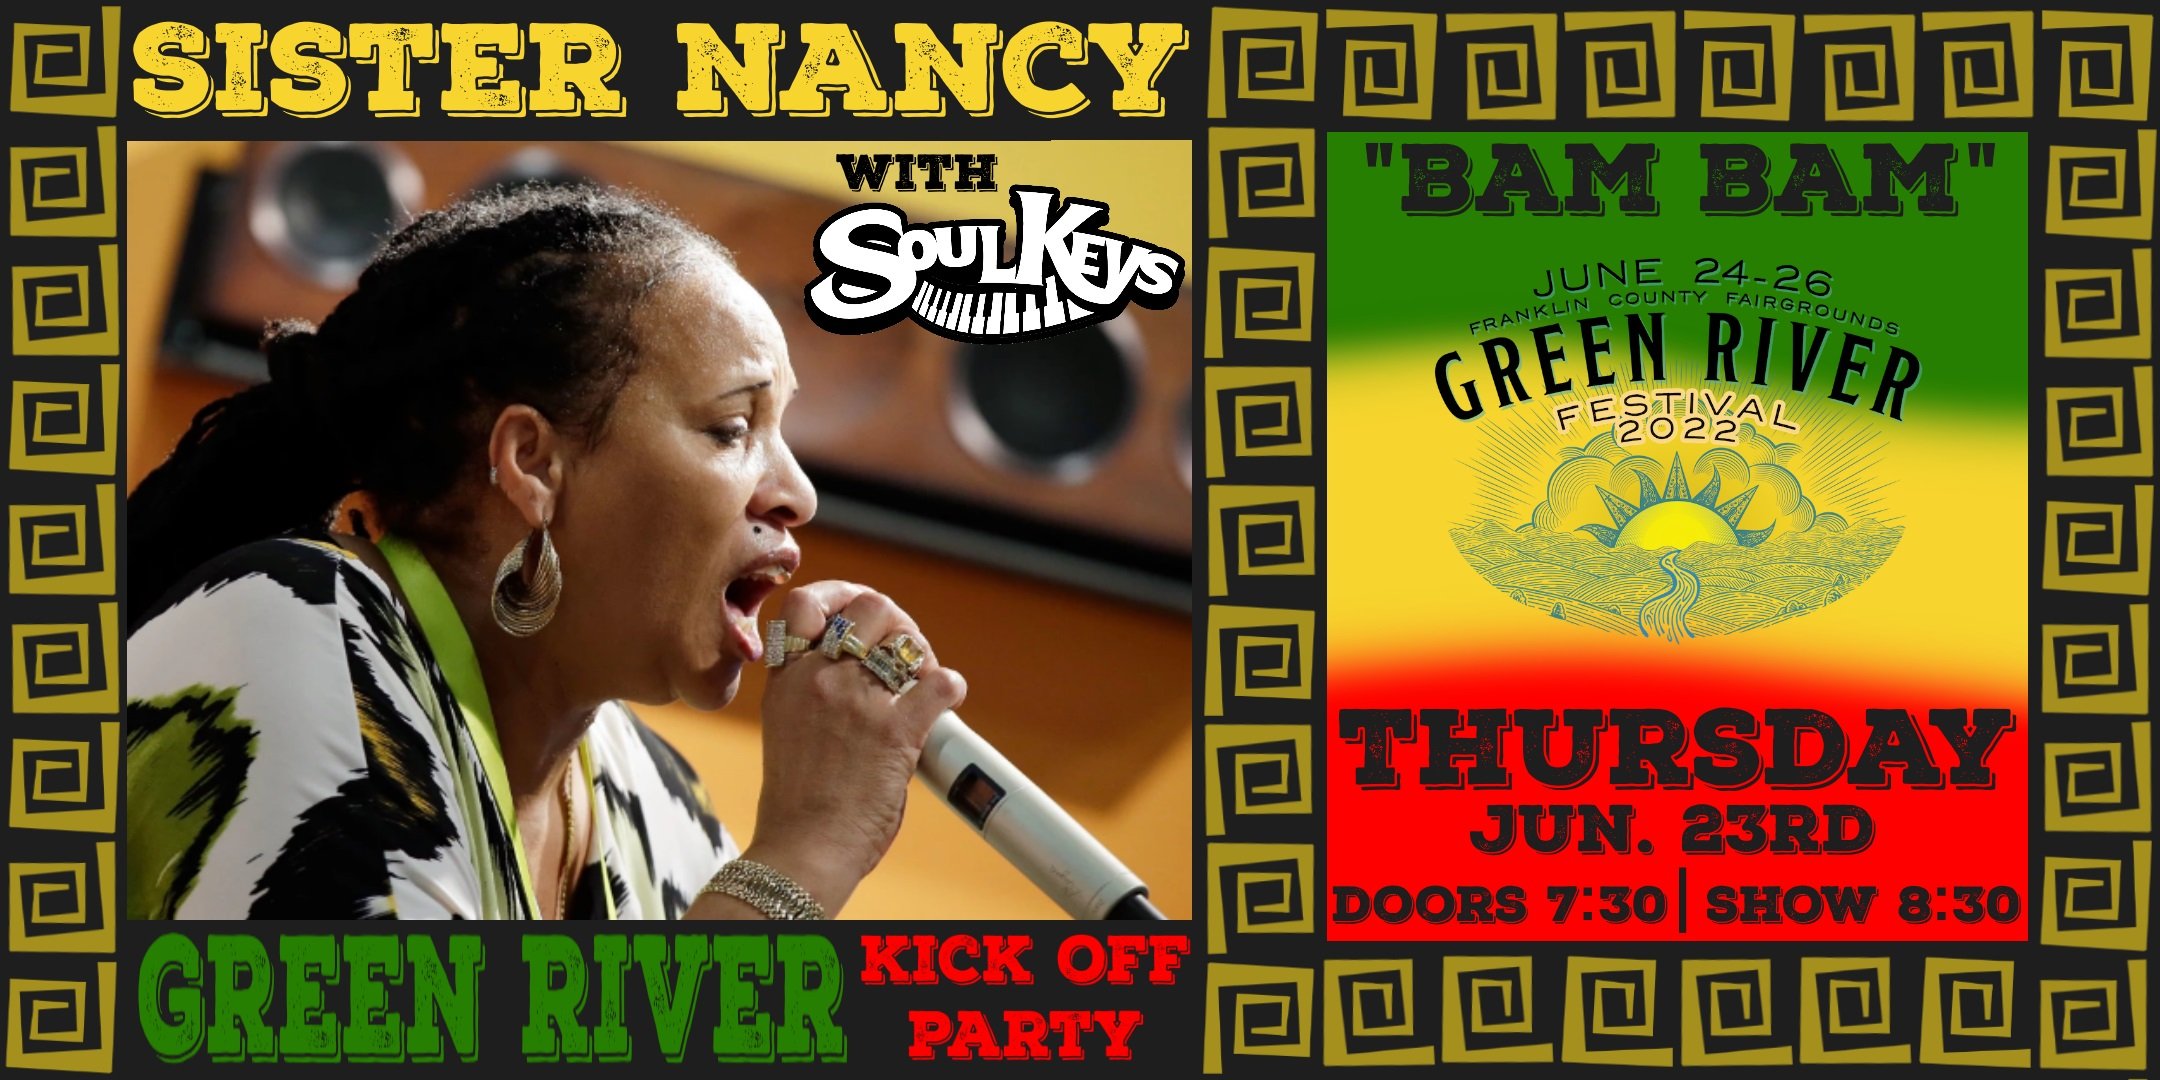 Green River Festival Kick-Off Party with Sister Nancy and SoulKeys